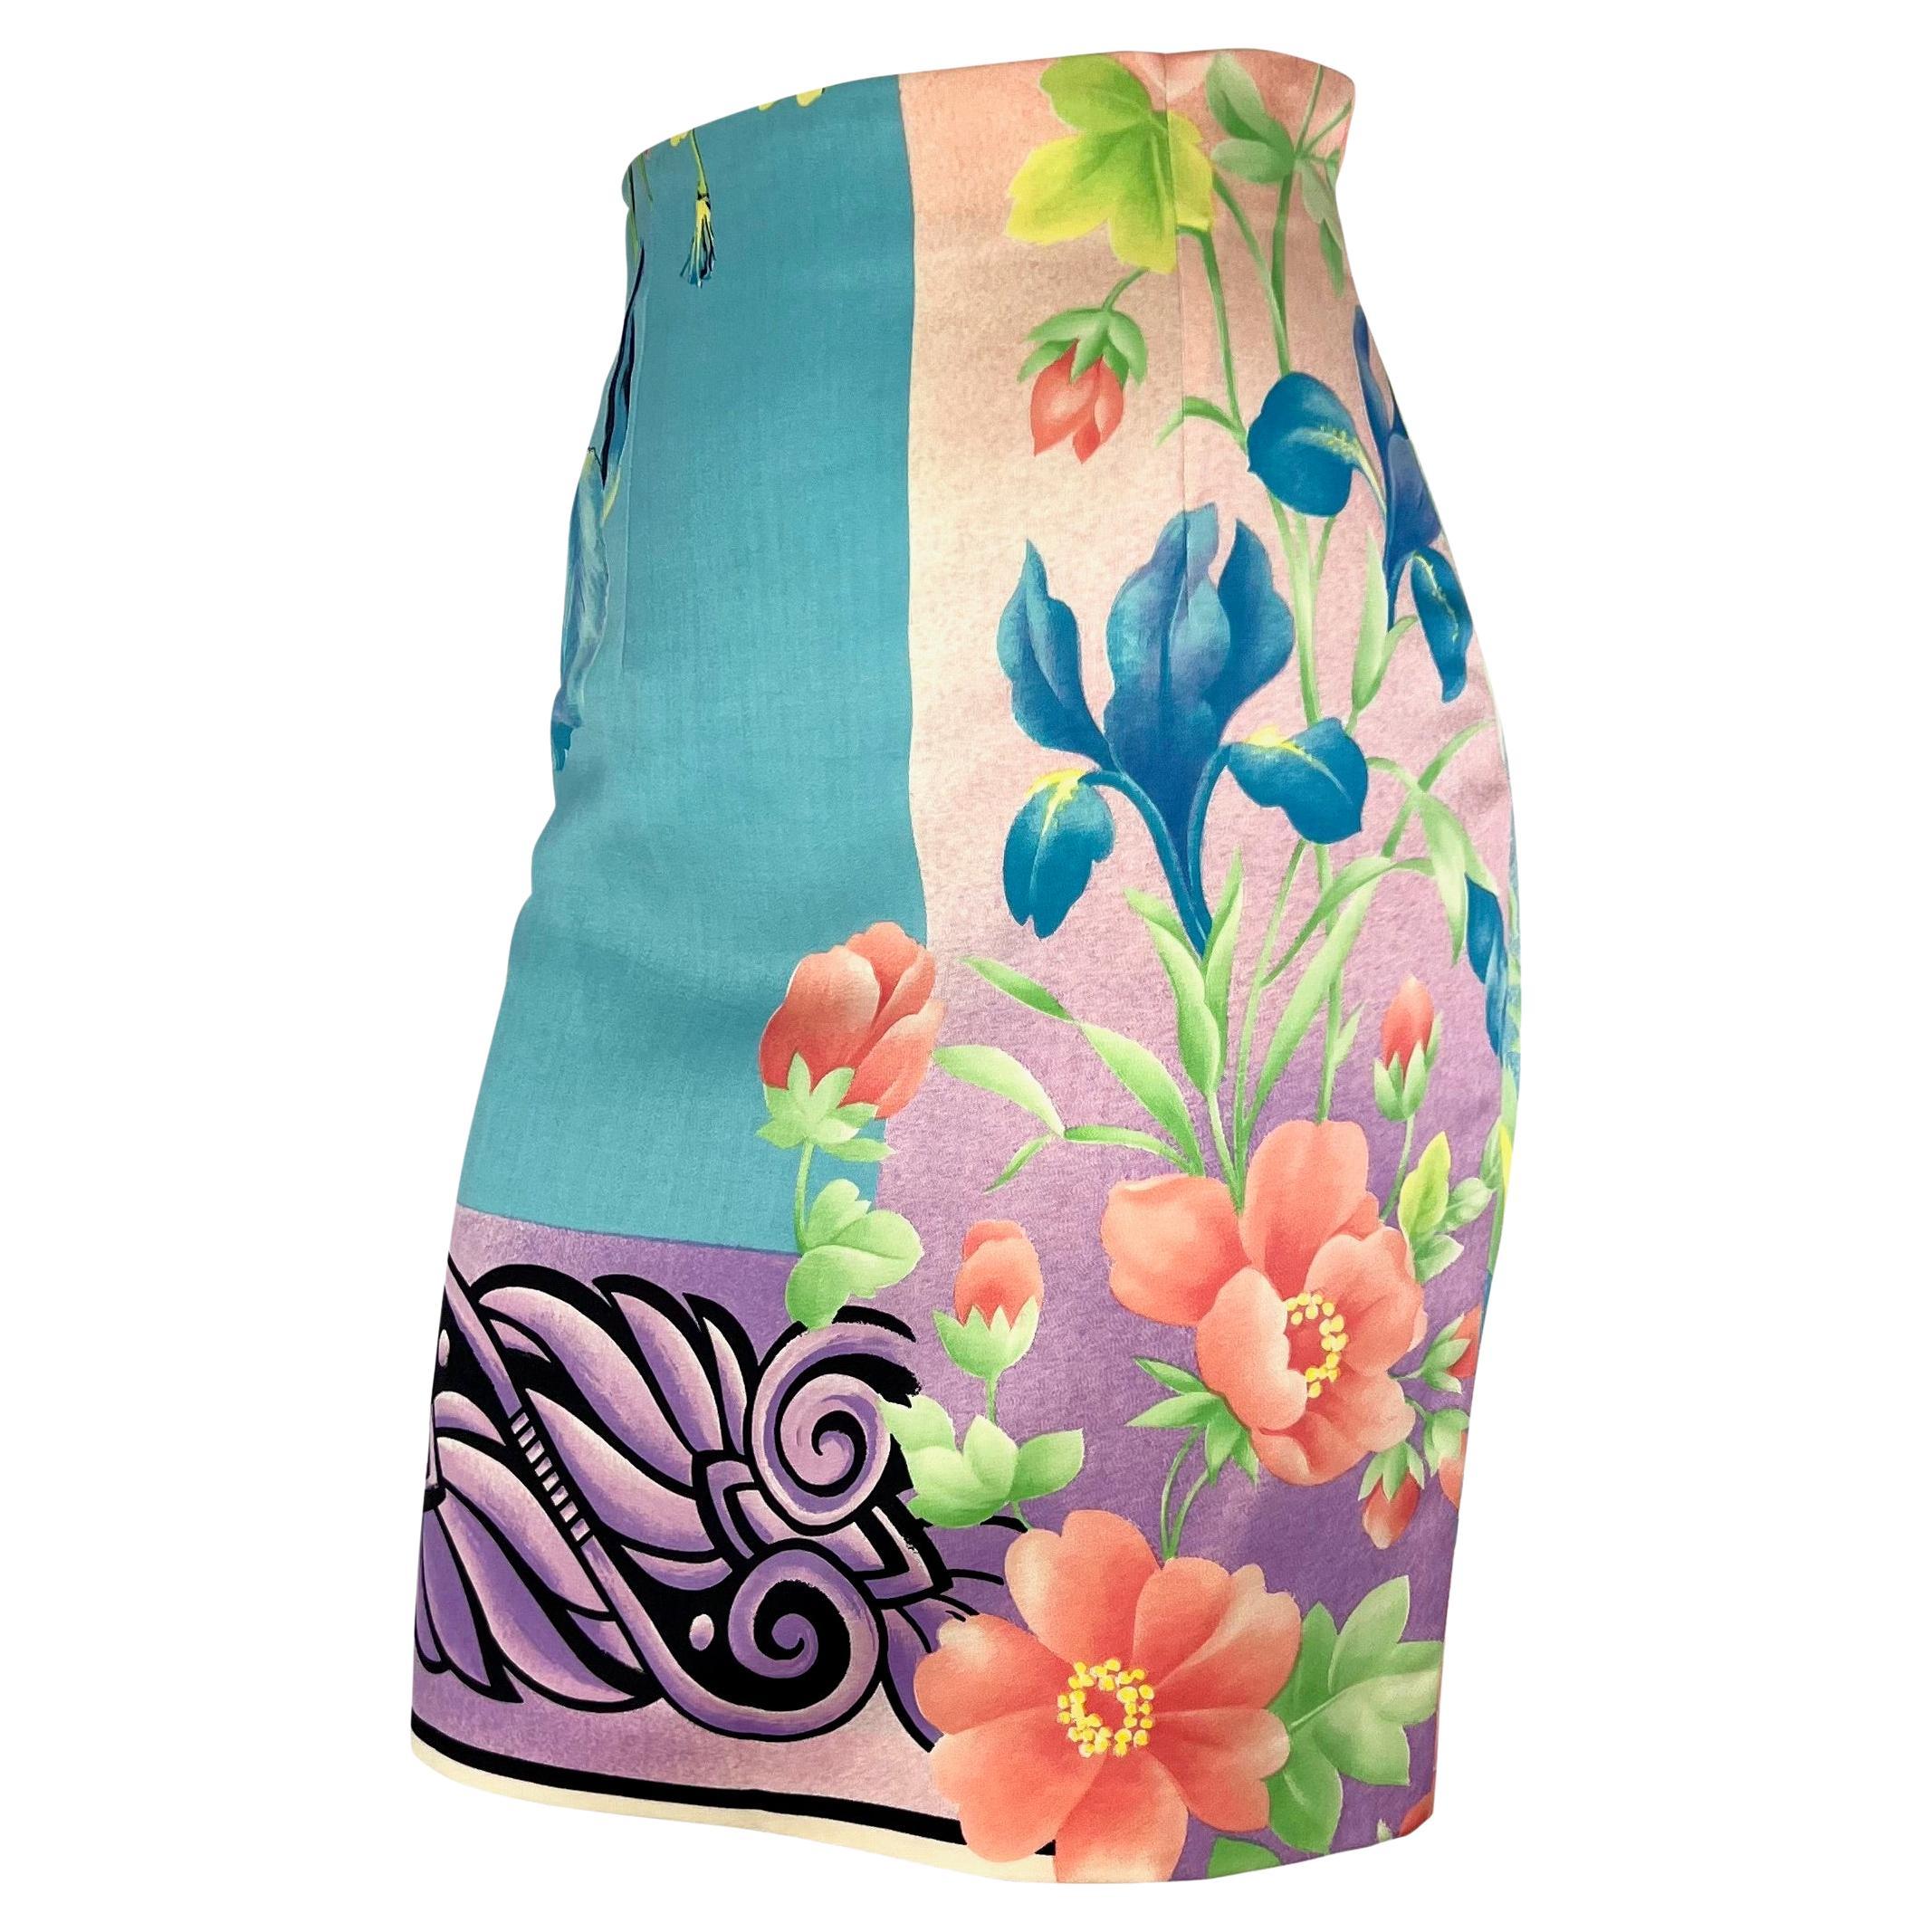 Presenting a fabulous pastel Gianni Versace pencil skirt, designed by Gianni Versace. From the Spring/Summer 1992 collection, this skirt features an enchanting combination of floral and Roman motifs, a testament to the brand's unique vision. The